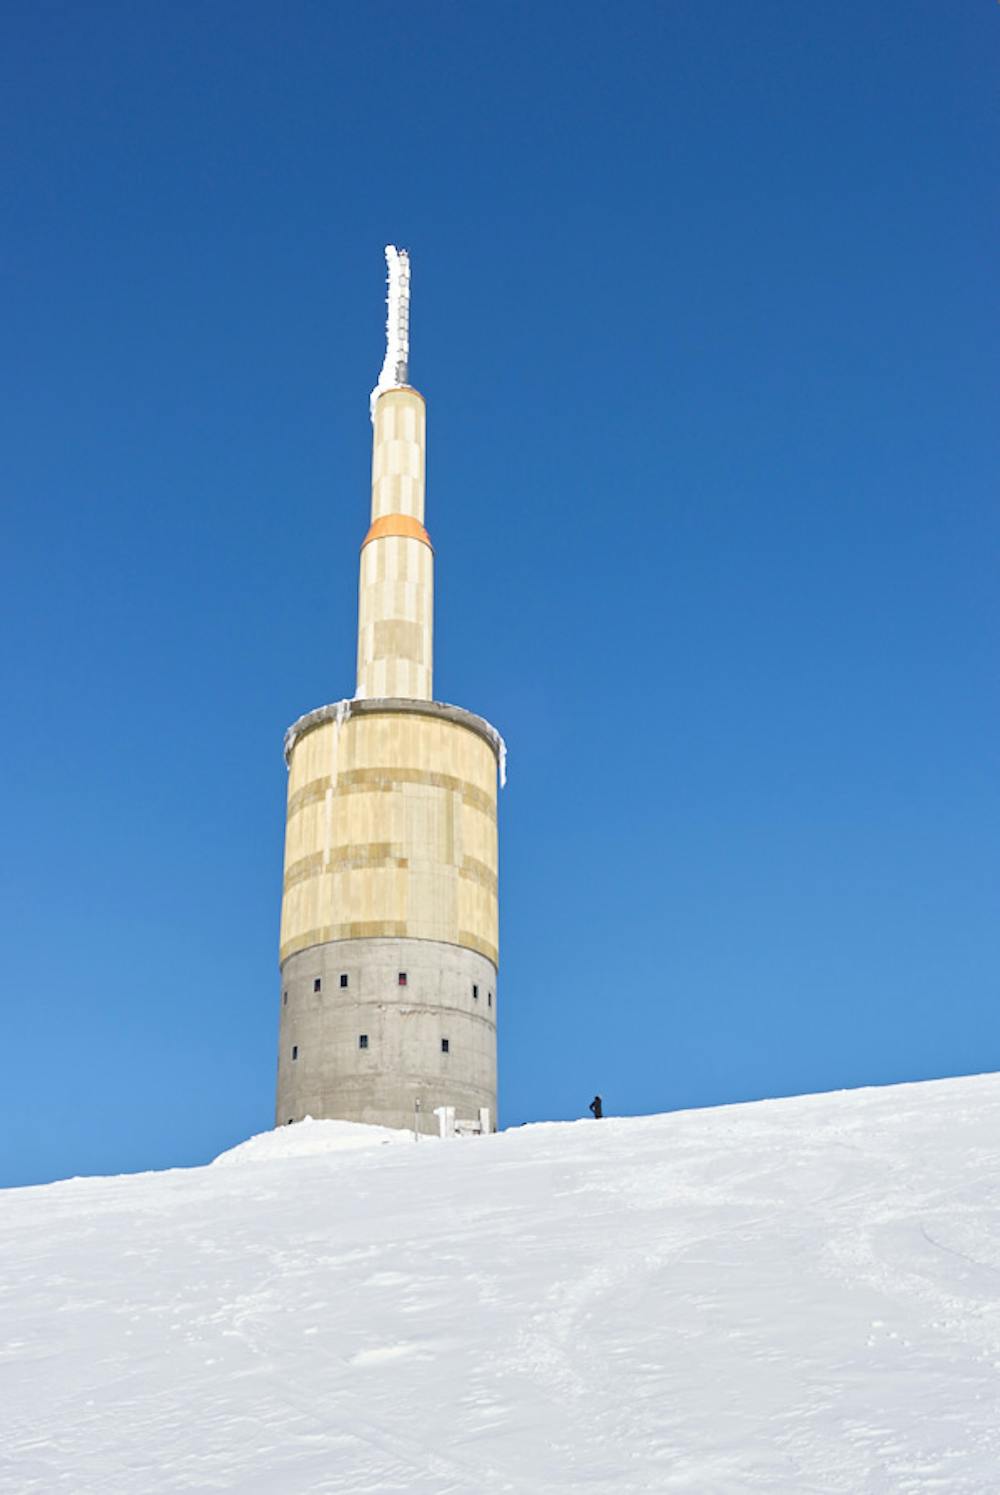 The summit TV tower 